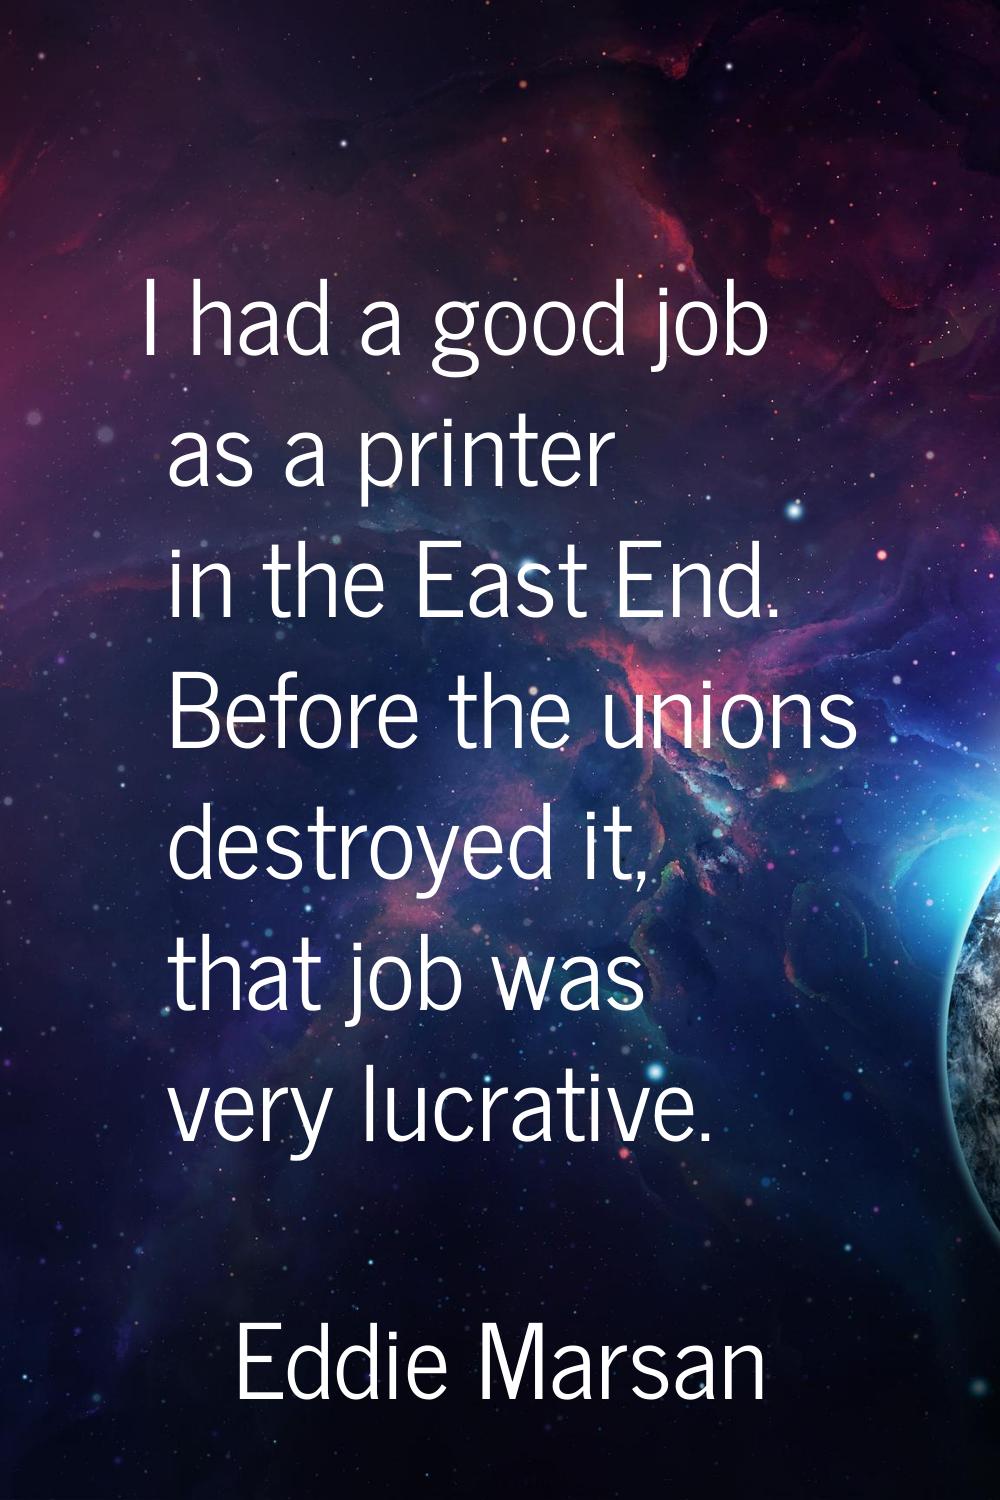 I had a good job as a printer in the East End. Before the unions destroyed it, that job was very lu